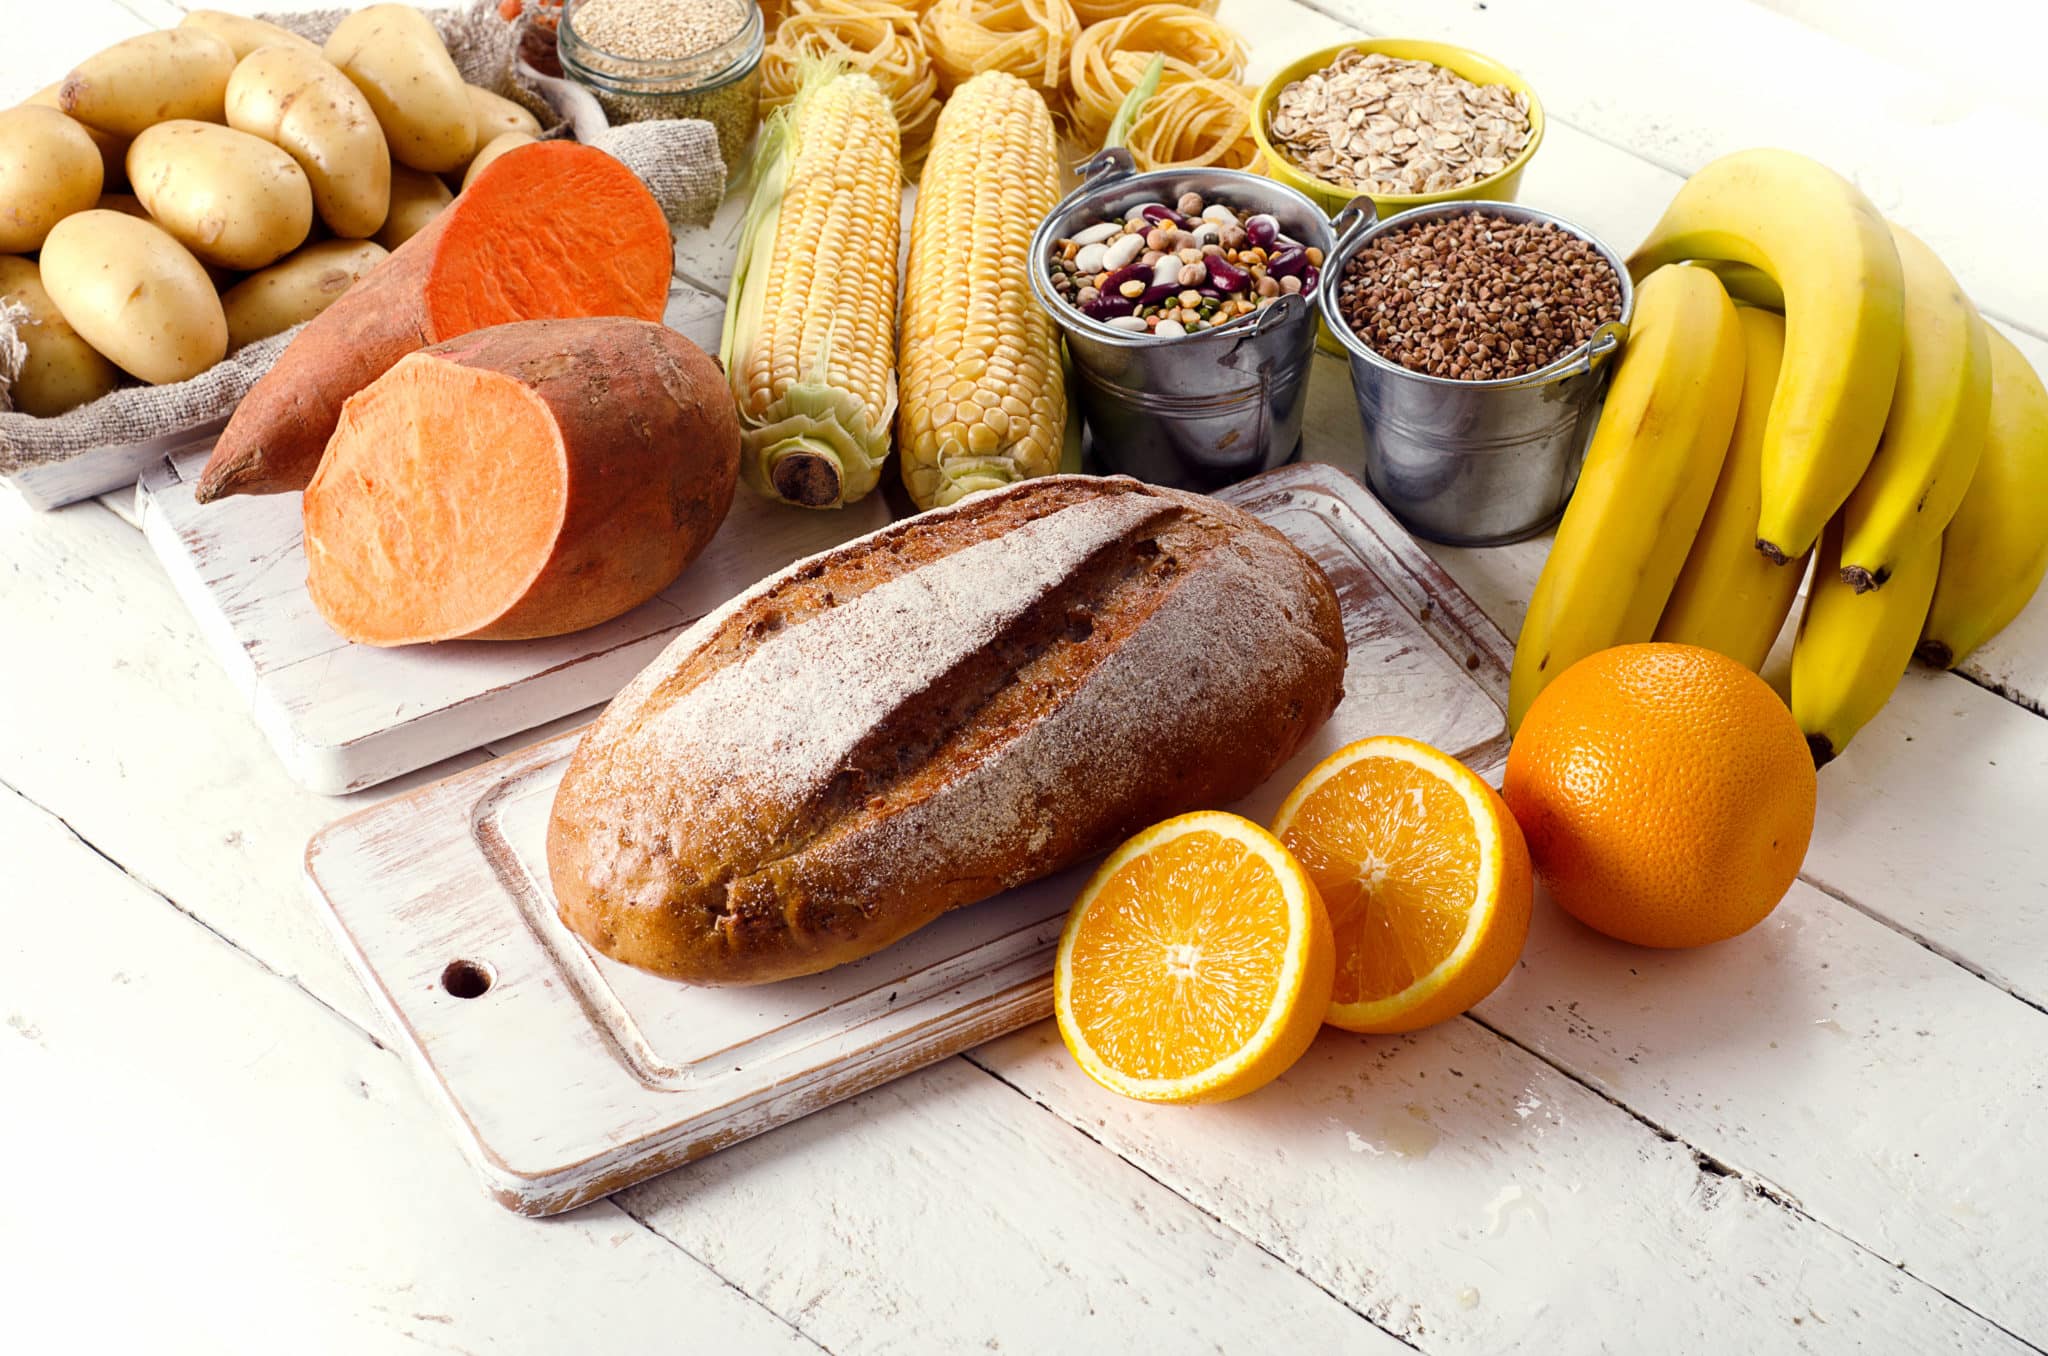 Table of various carbohydrate foods like bread, sweet potatoes, corn, and grains